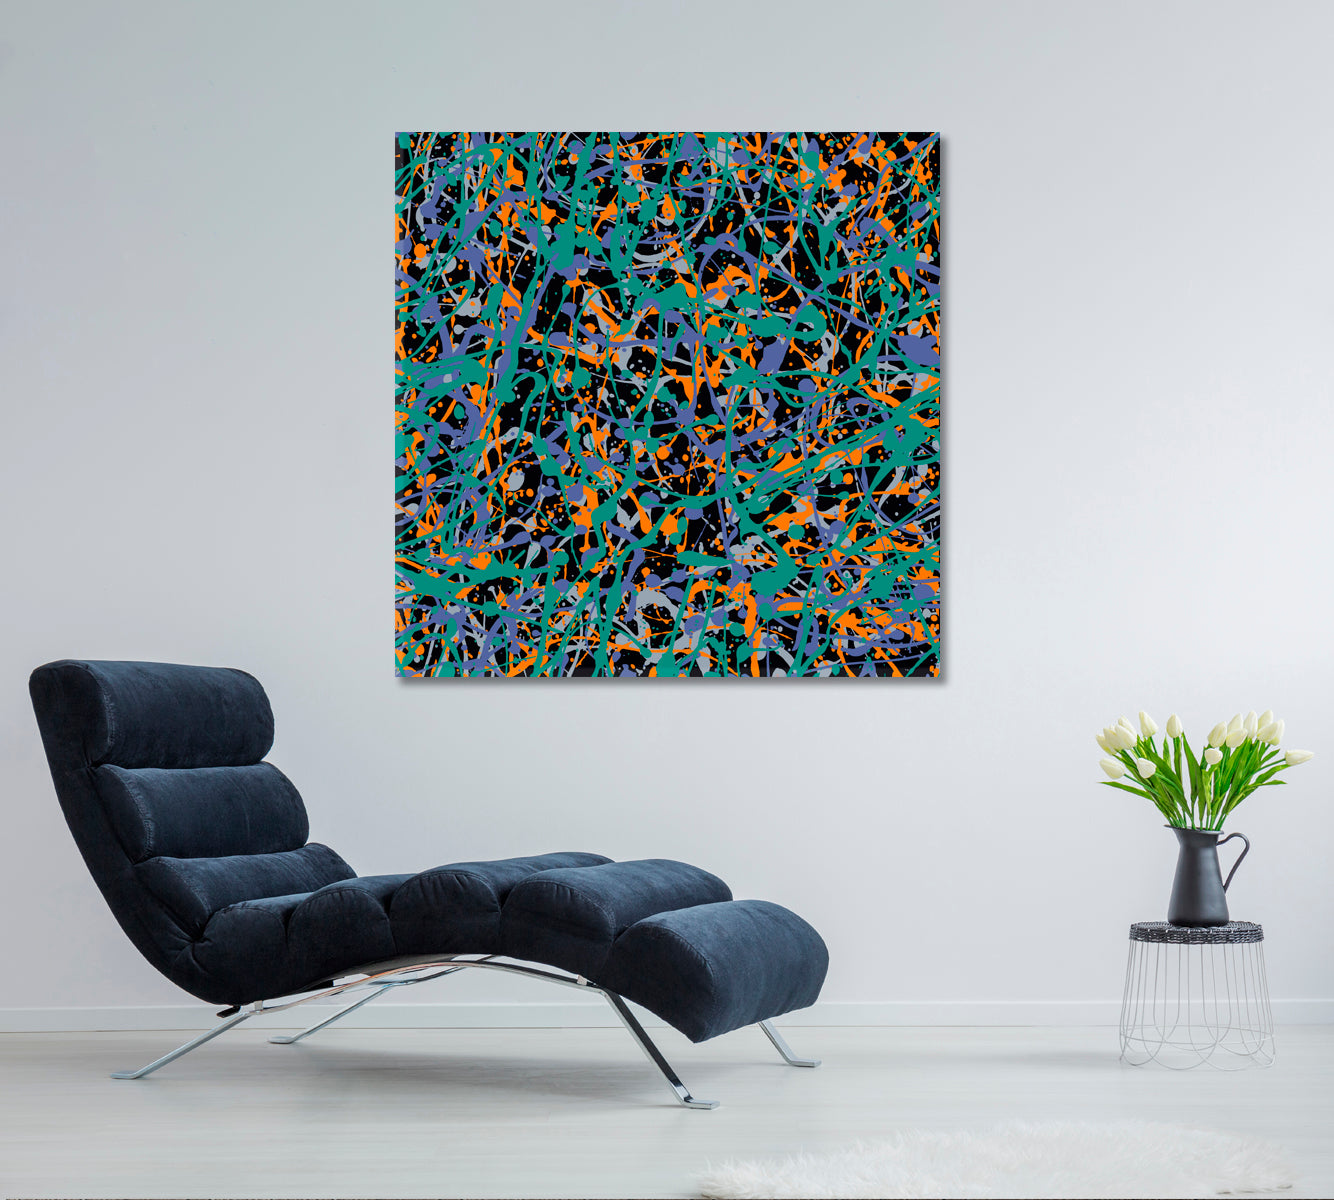 Paint Splatter Abstract Painting 104 by Bob Smerecki